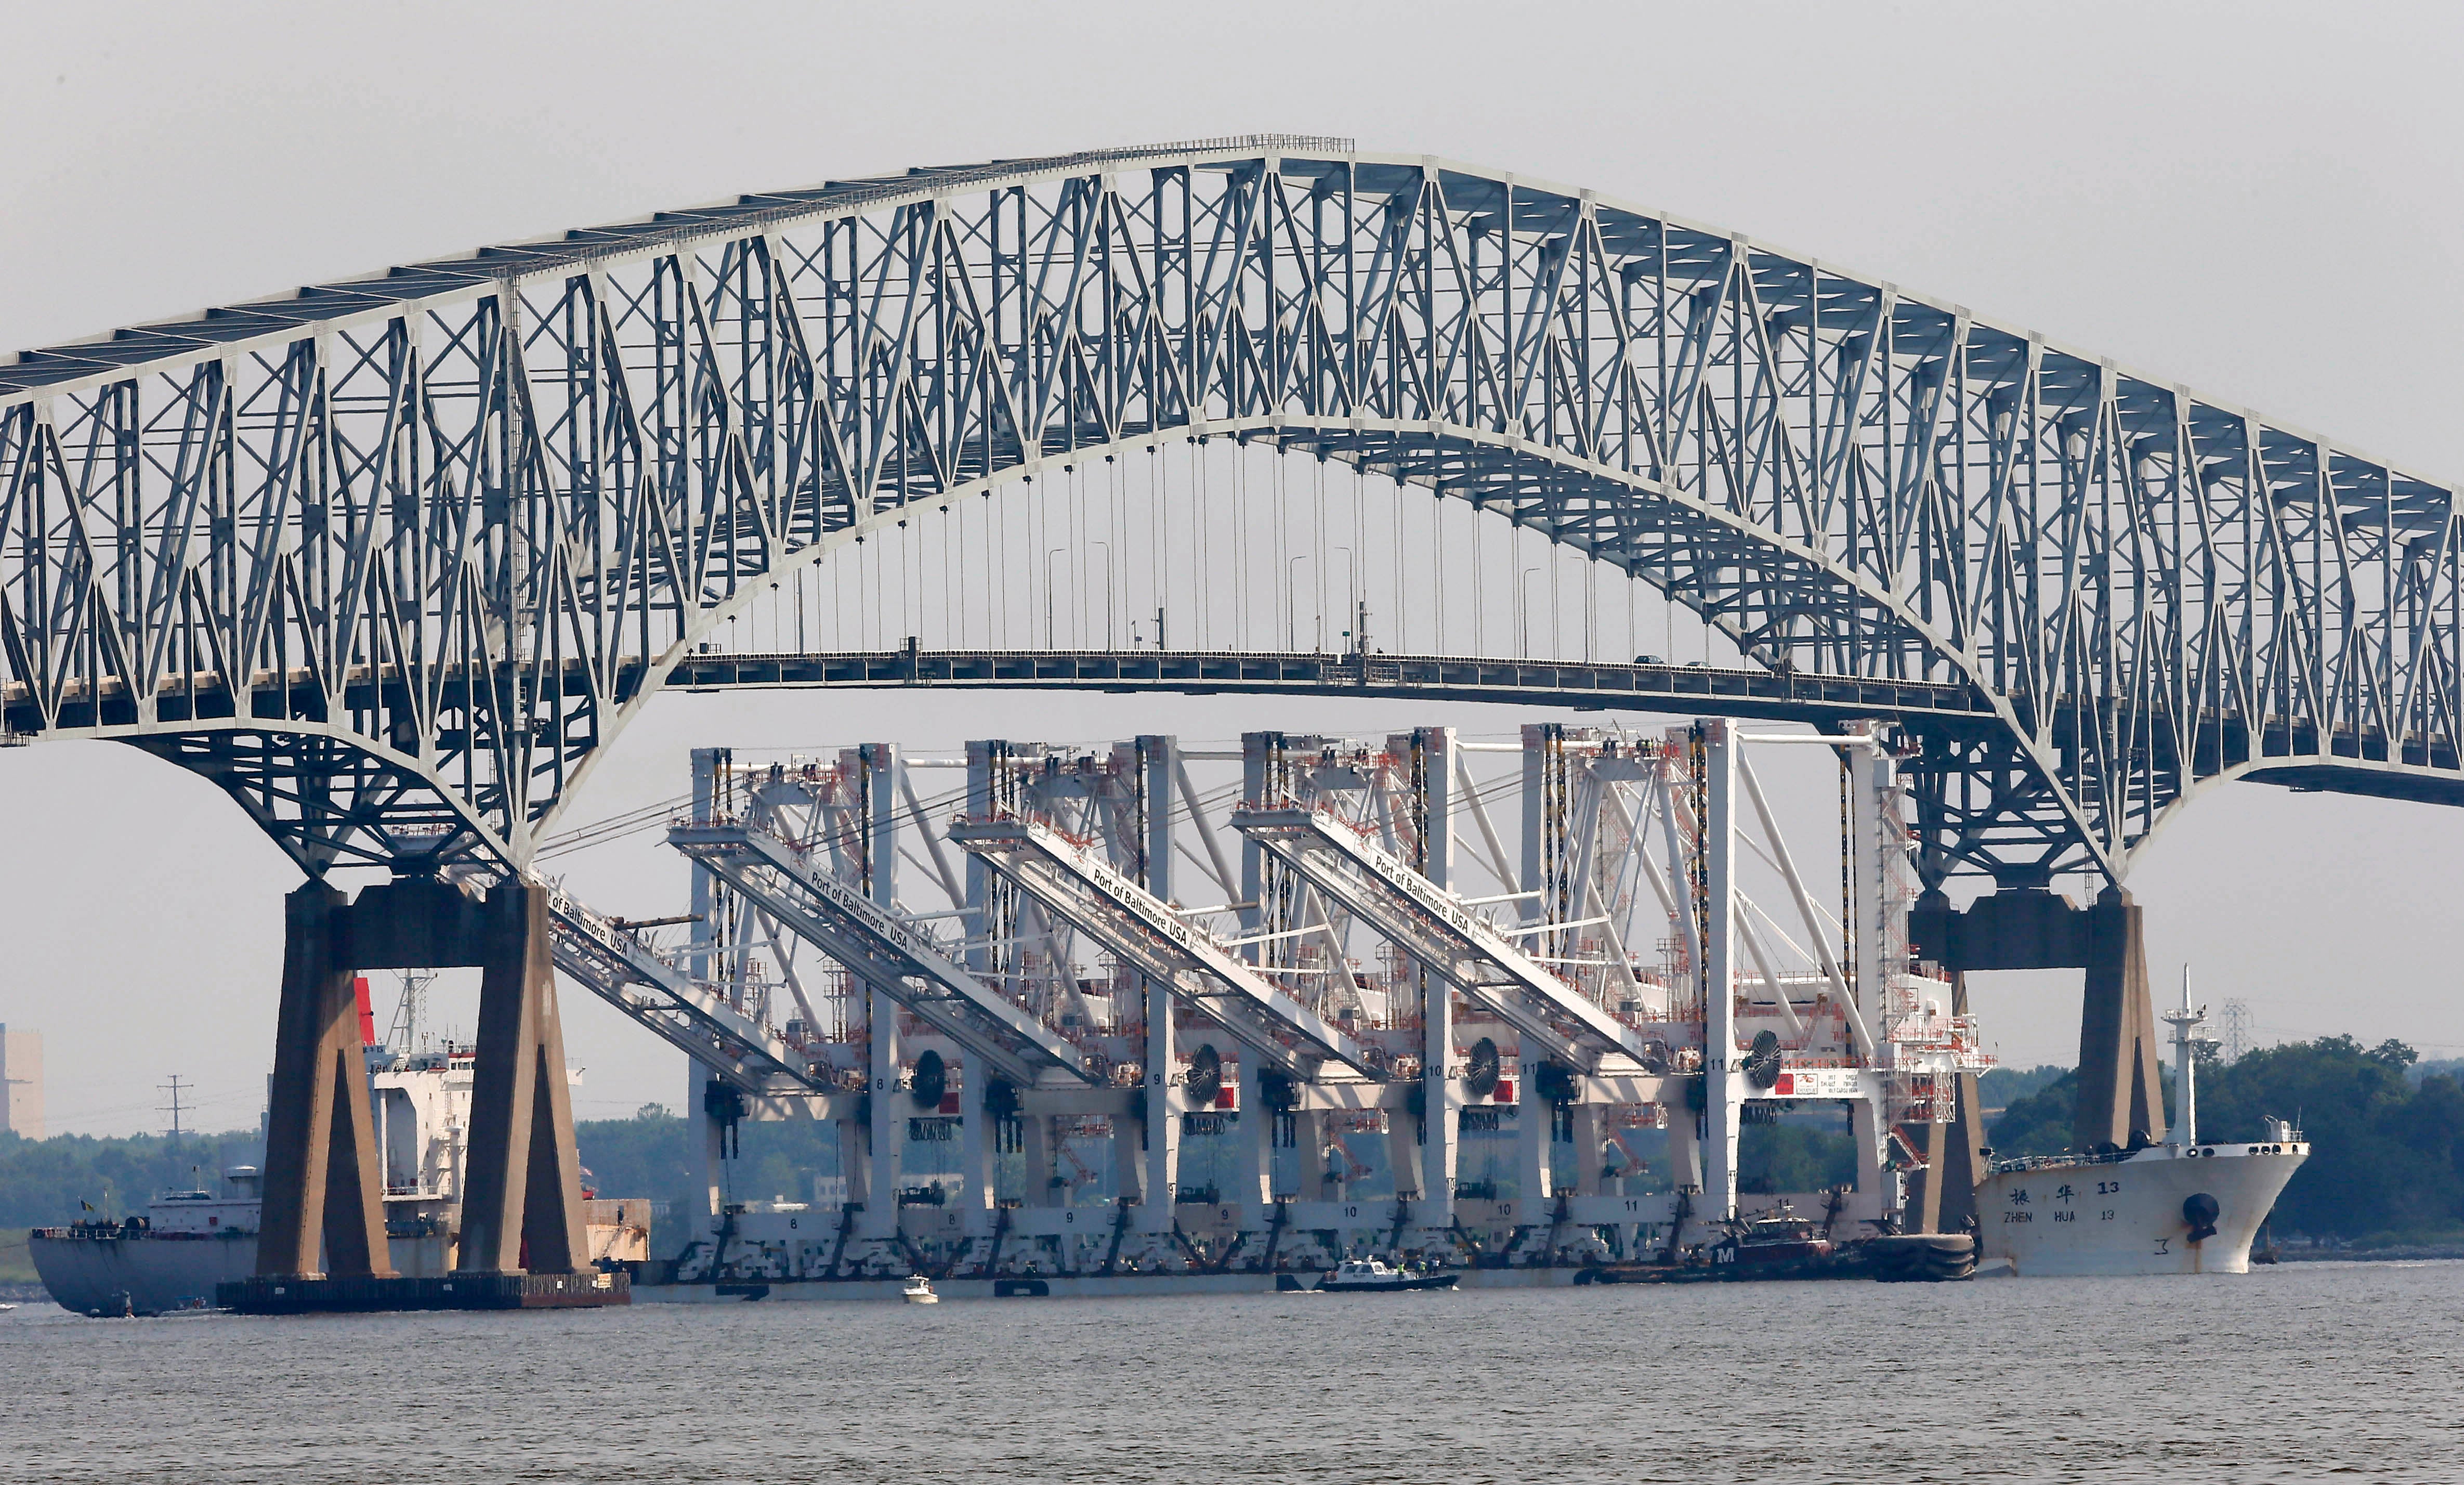 The Francis Scott Key Bridge was completed in 1977 and carried 11.3 million vehicles a year